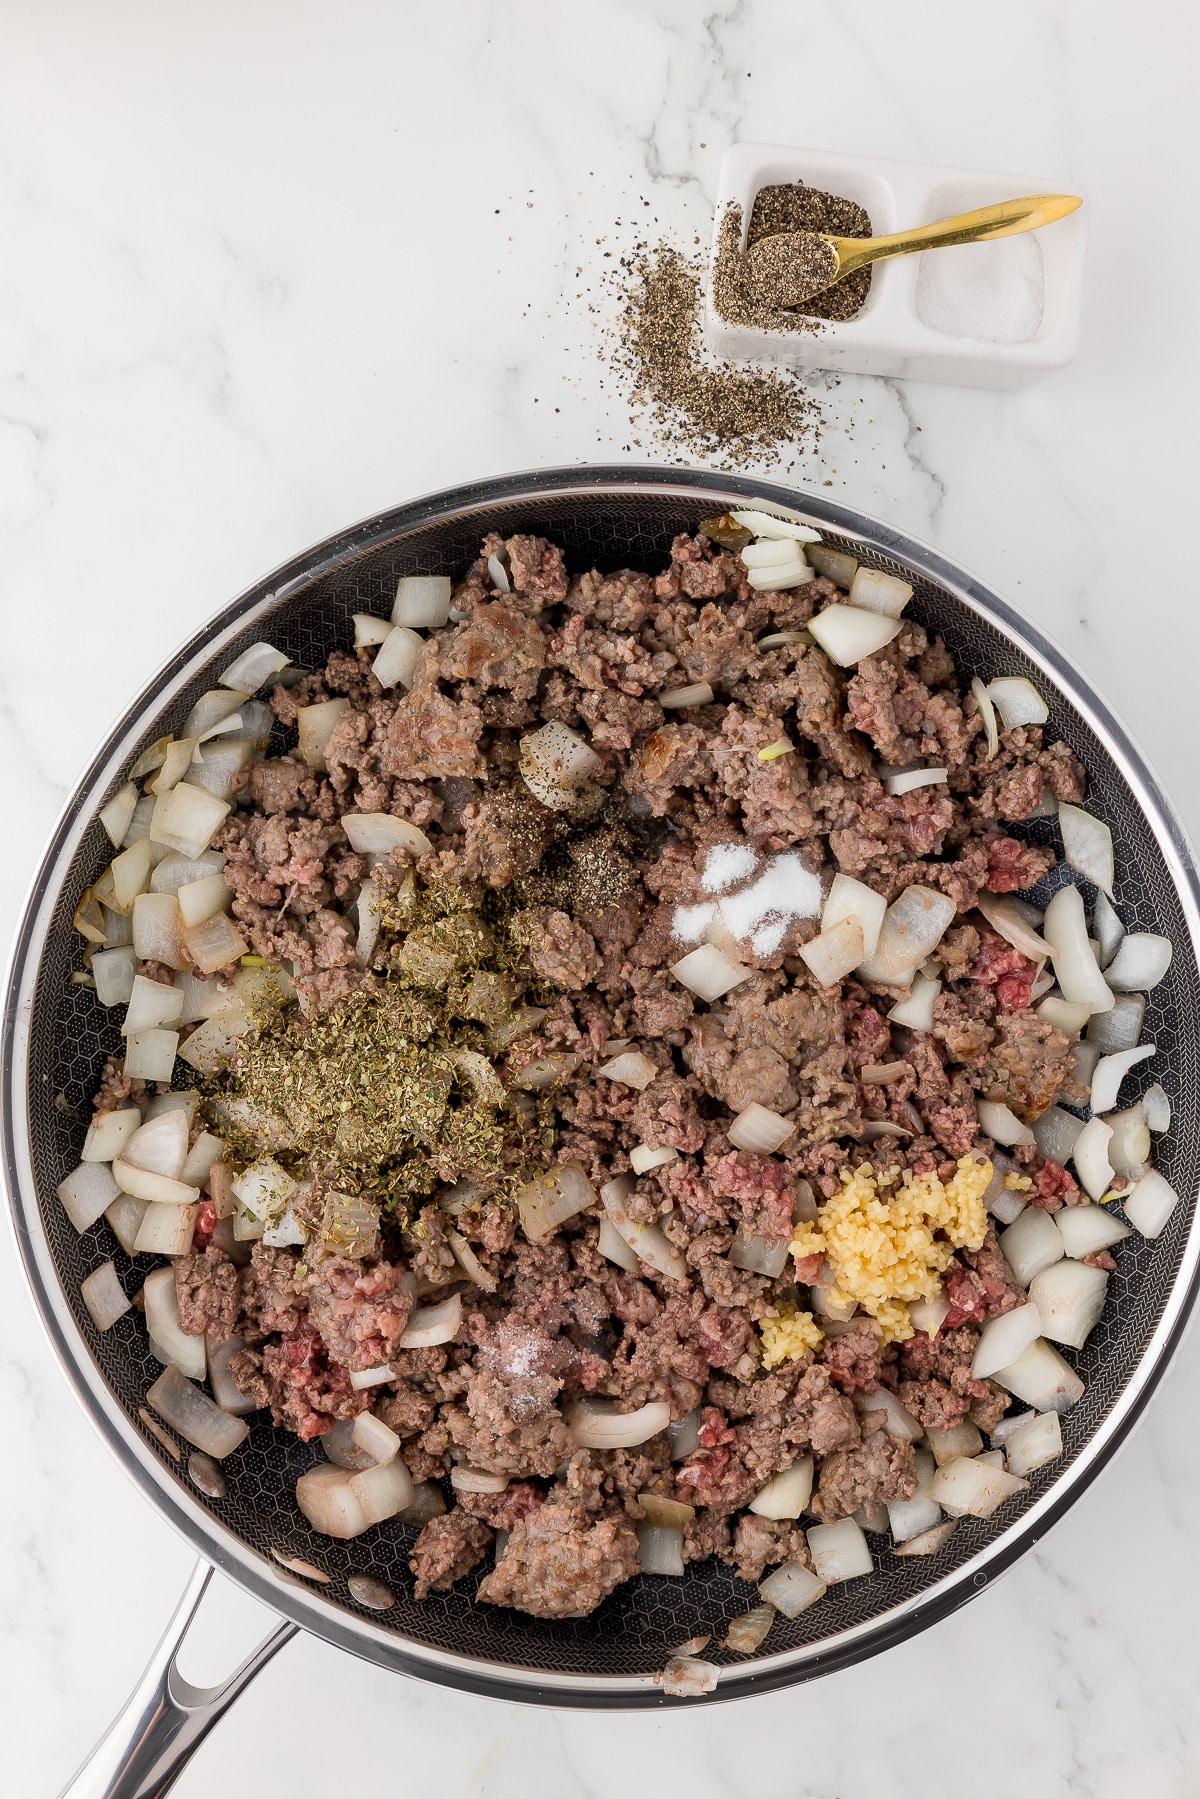 Ground meat, ground sausage, chopped onions, and spices in a Gordon Ramsay hexclad pan on a white marble countertop with salt and pepper in the background.